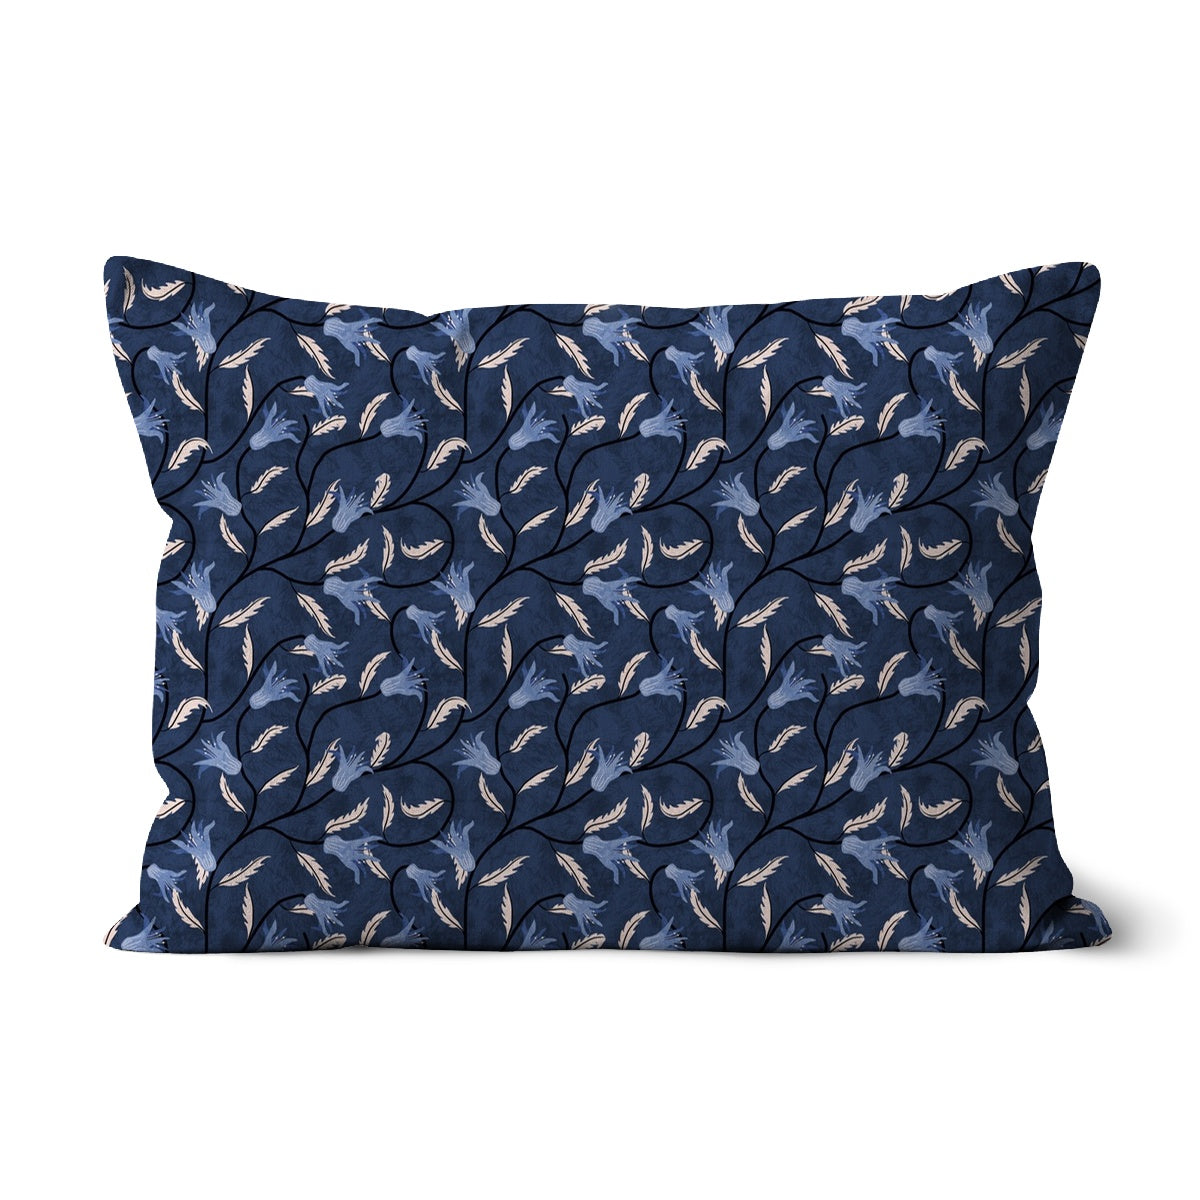 Bluebell Symphony: Serene Shades of Blue Cushion with insert